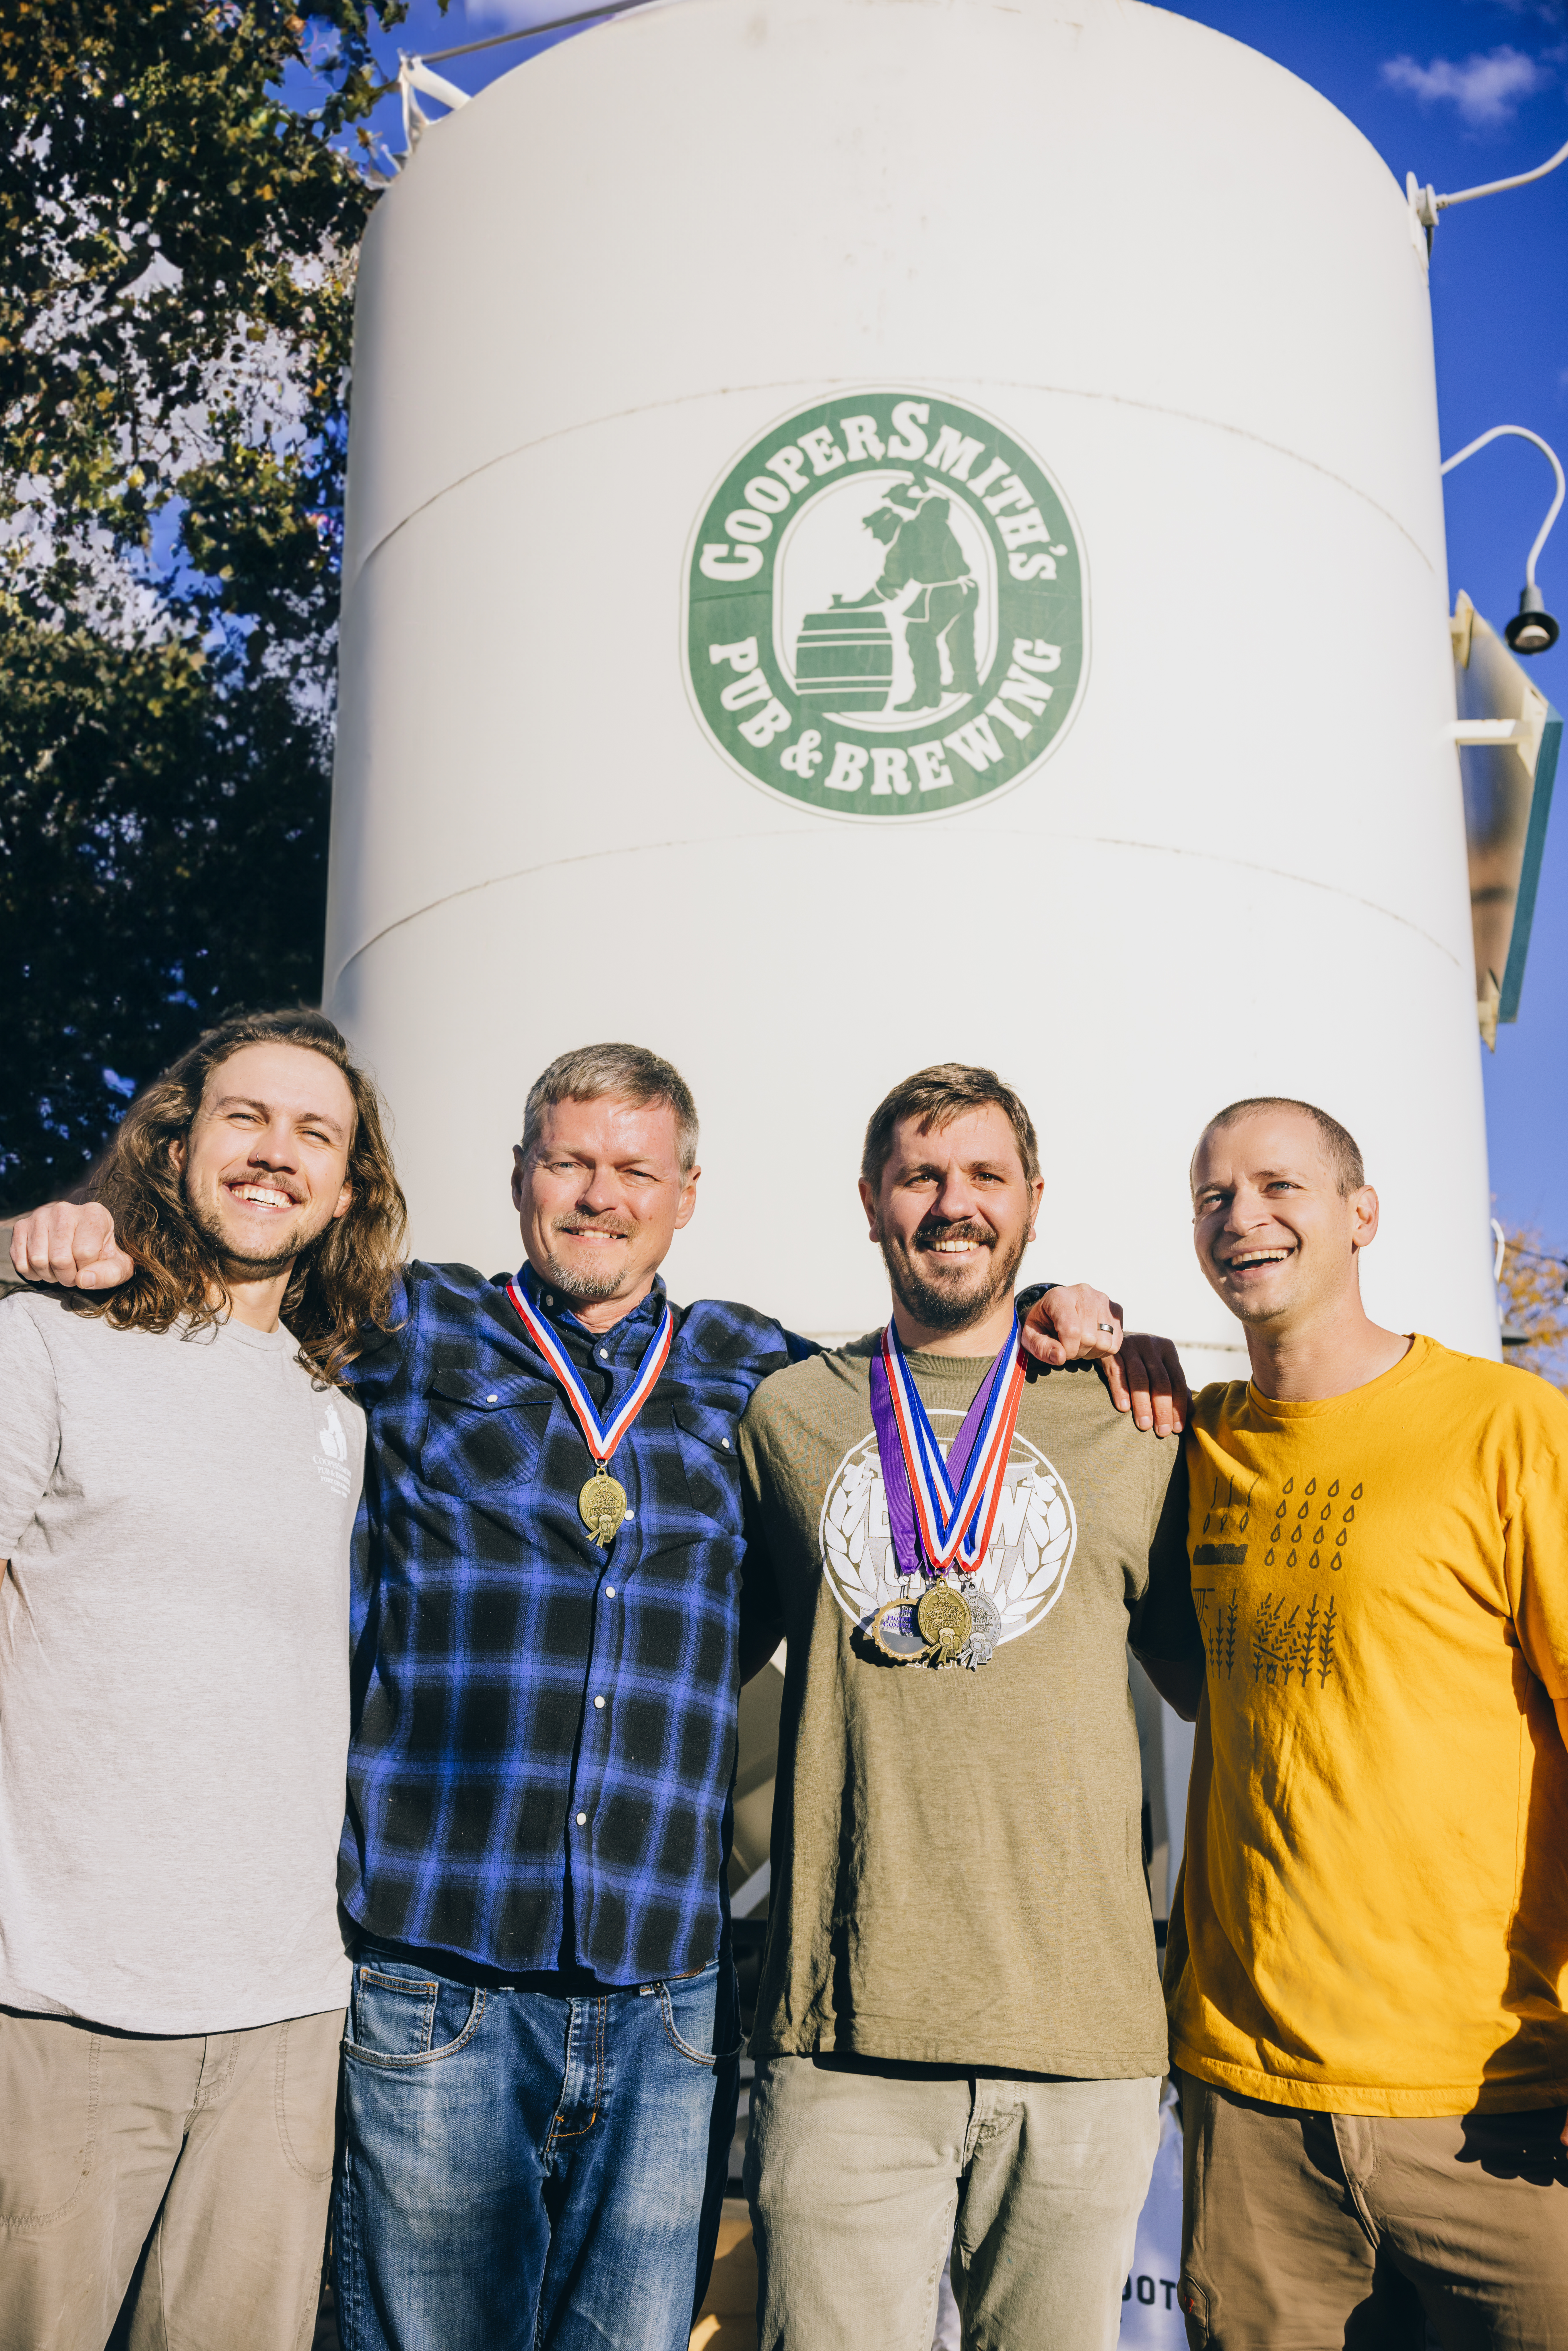 CooperSmith's brewing team standing in front of the CooperSmith's beer storage tank wearing their gold medals.